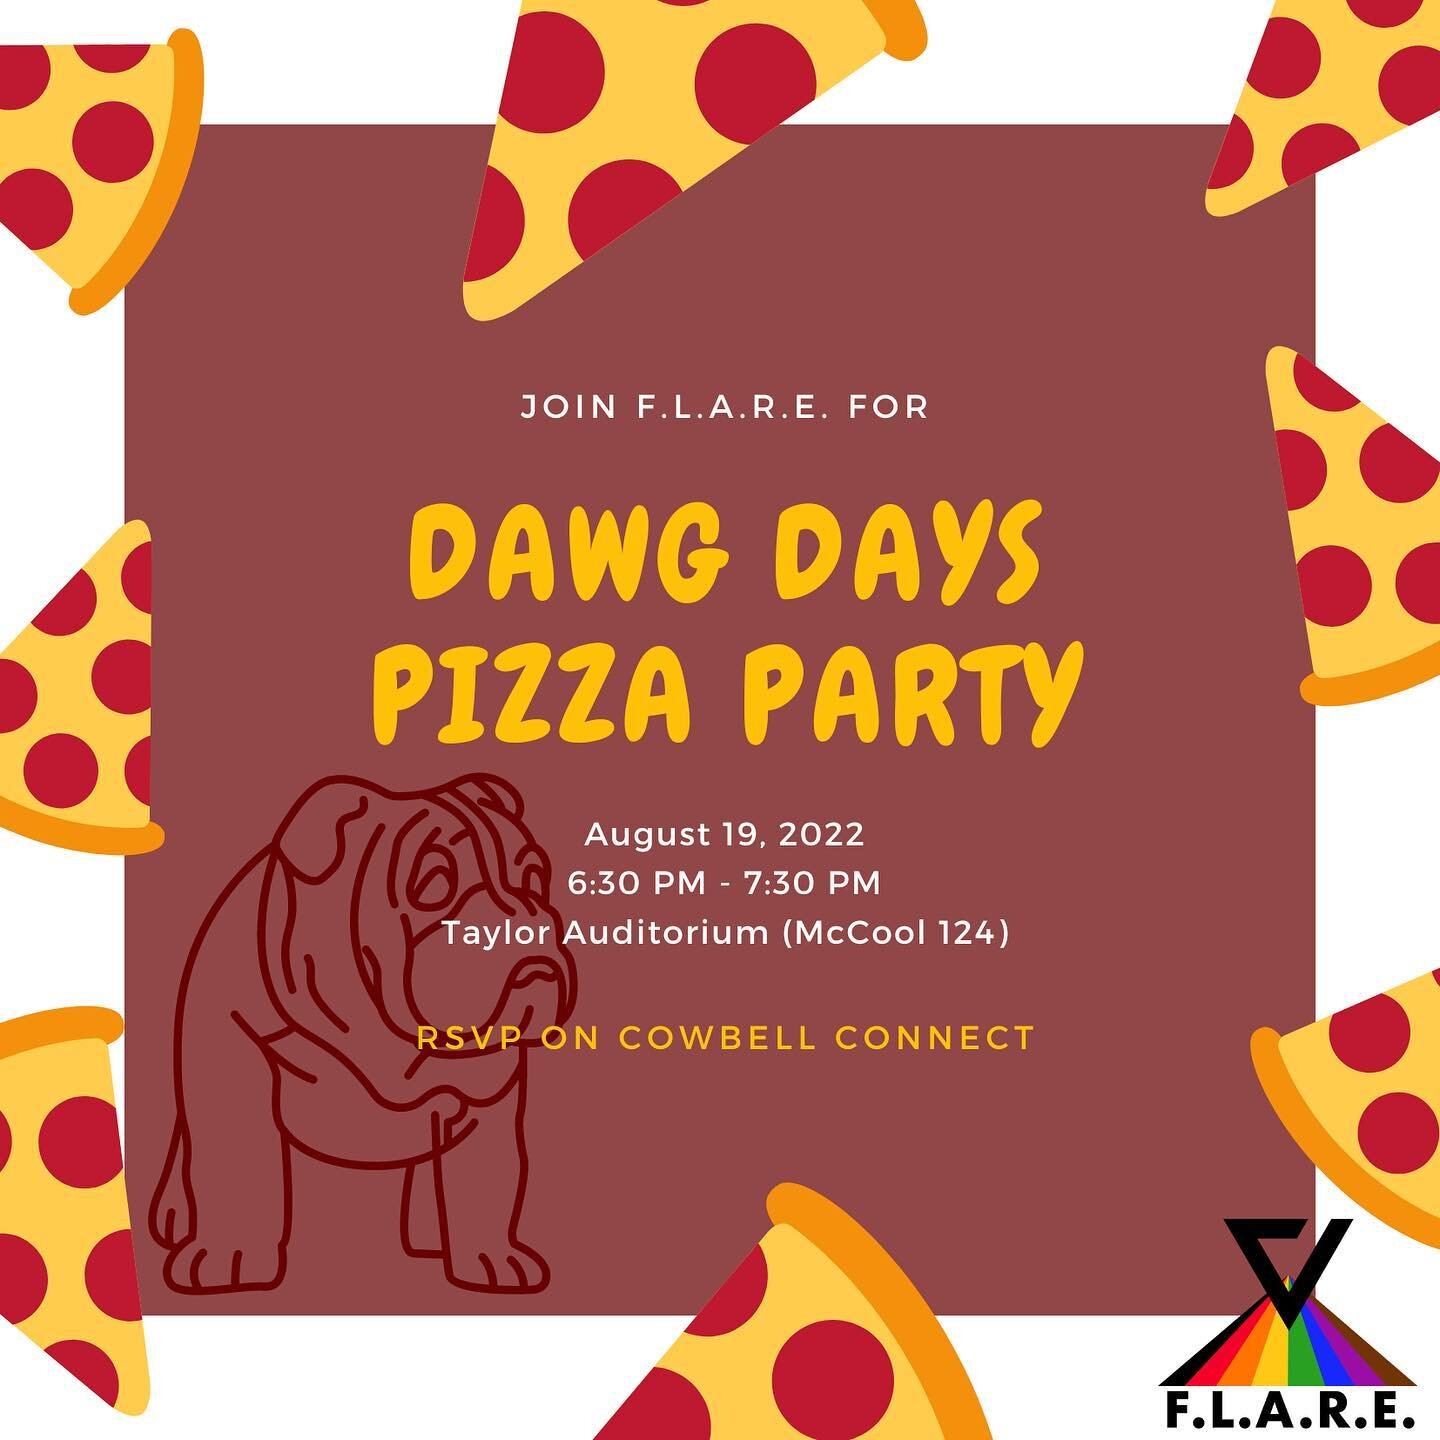 Join us for pizza and to learn more about our organization! 🍕🐾